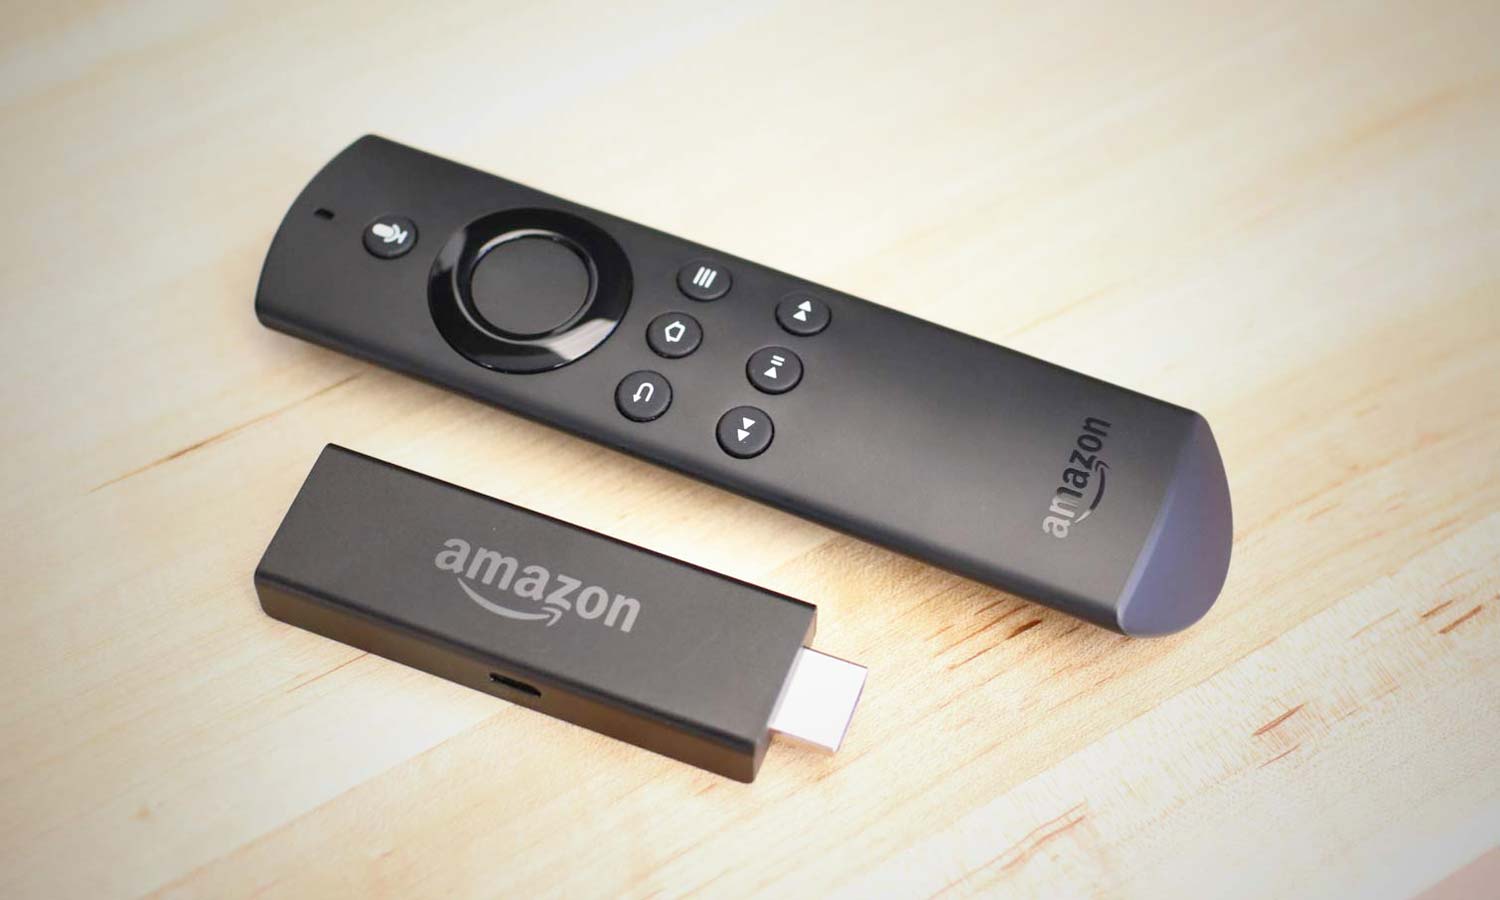 The Amazon Fire TV stick and its remote on a table